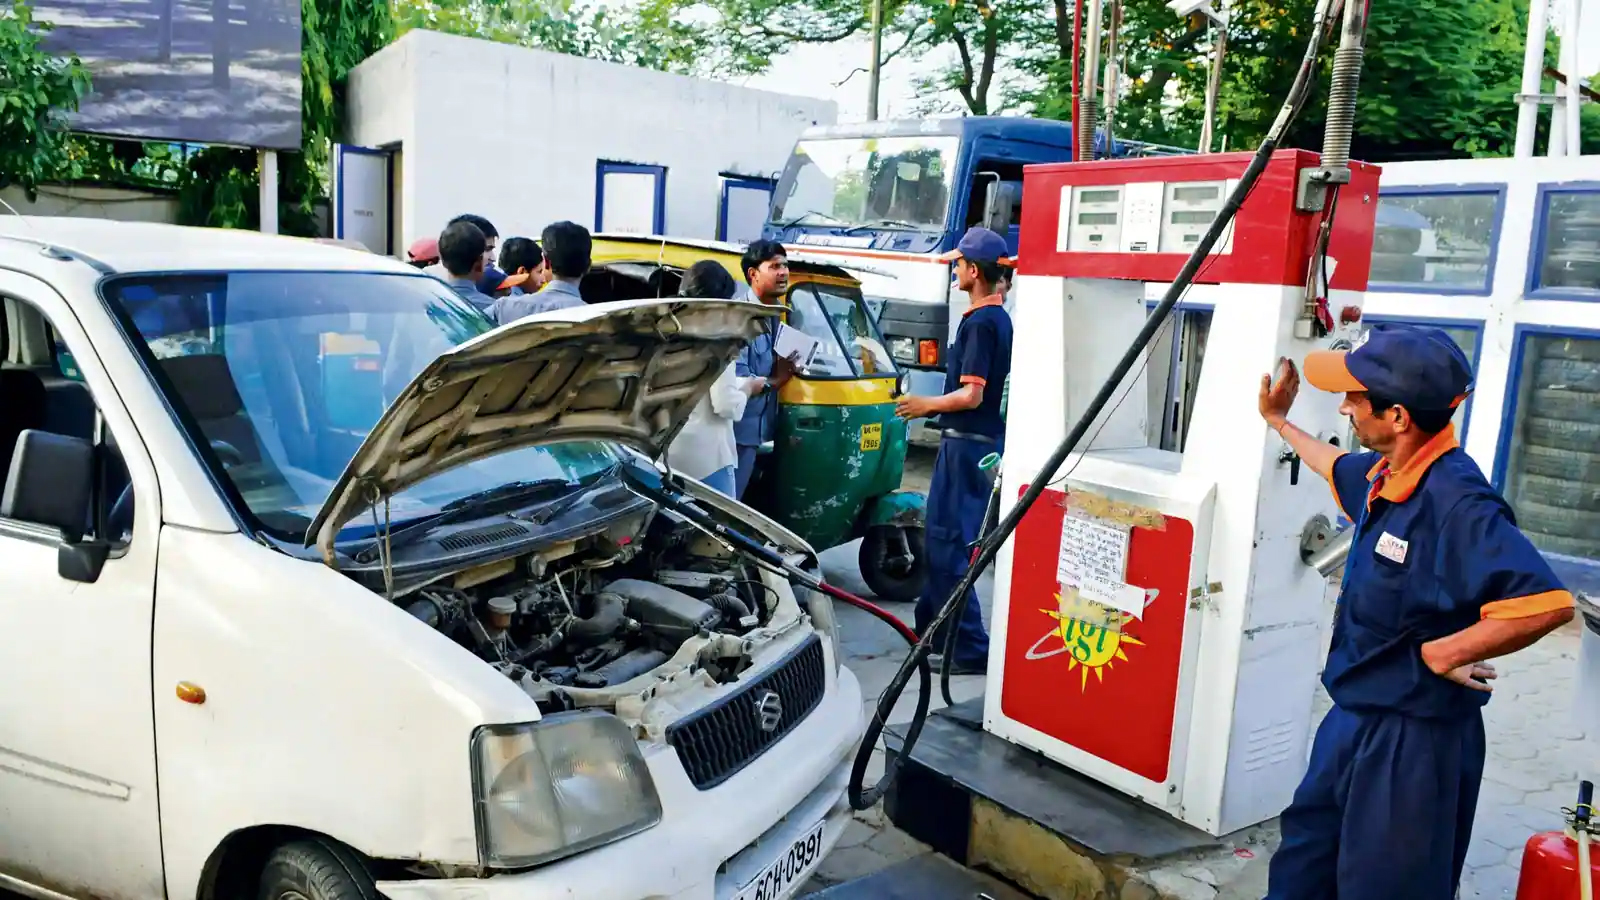 Sale of CNG stopped